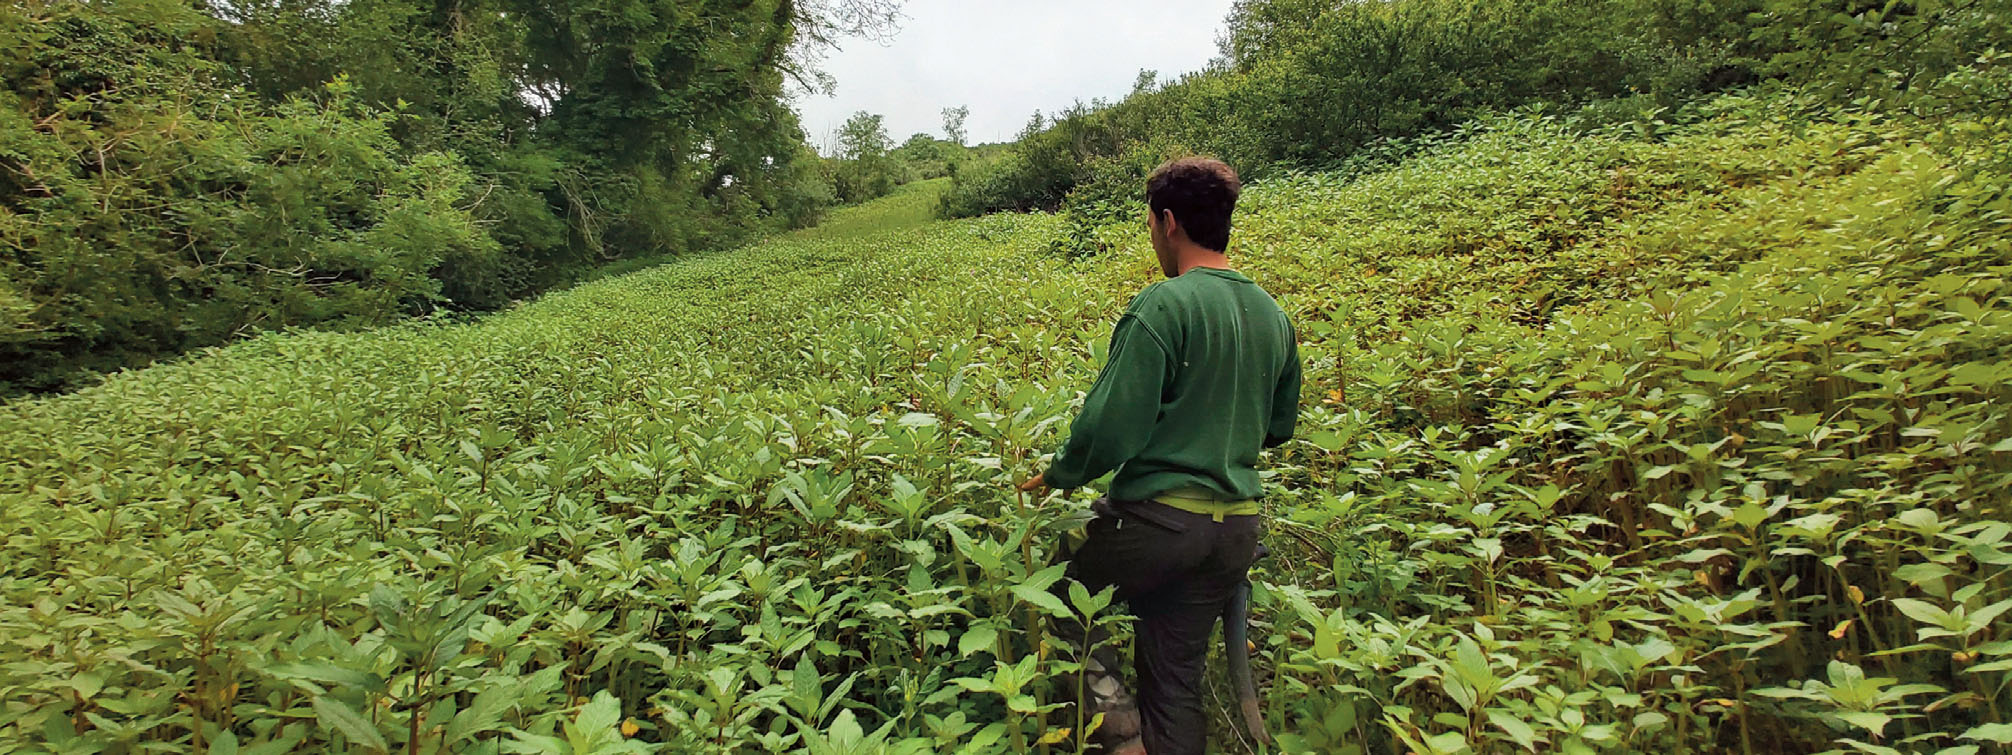 Man standing in a field that is covered in waist-high Himalayan balsam plants